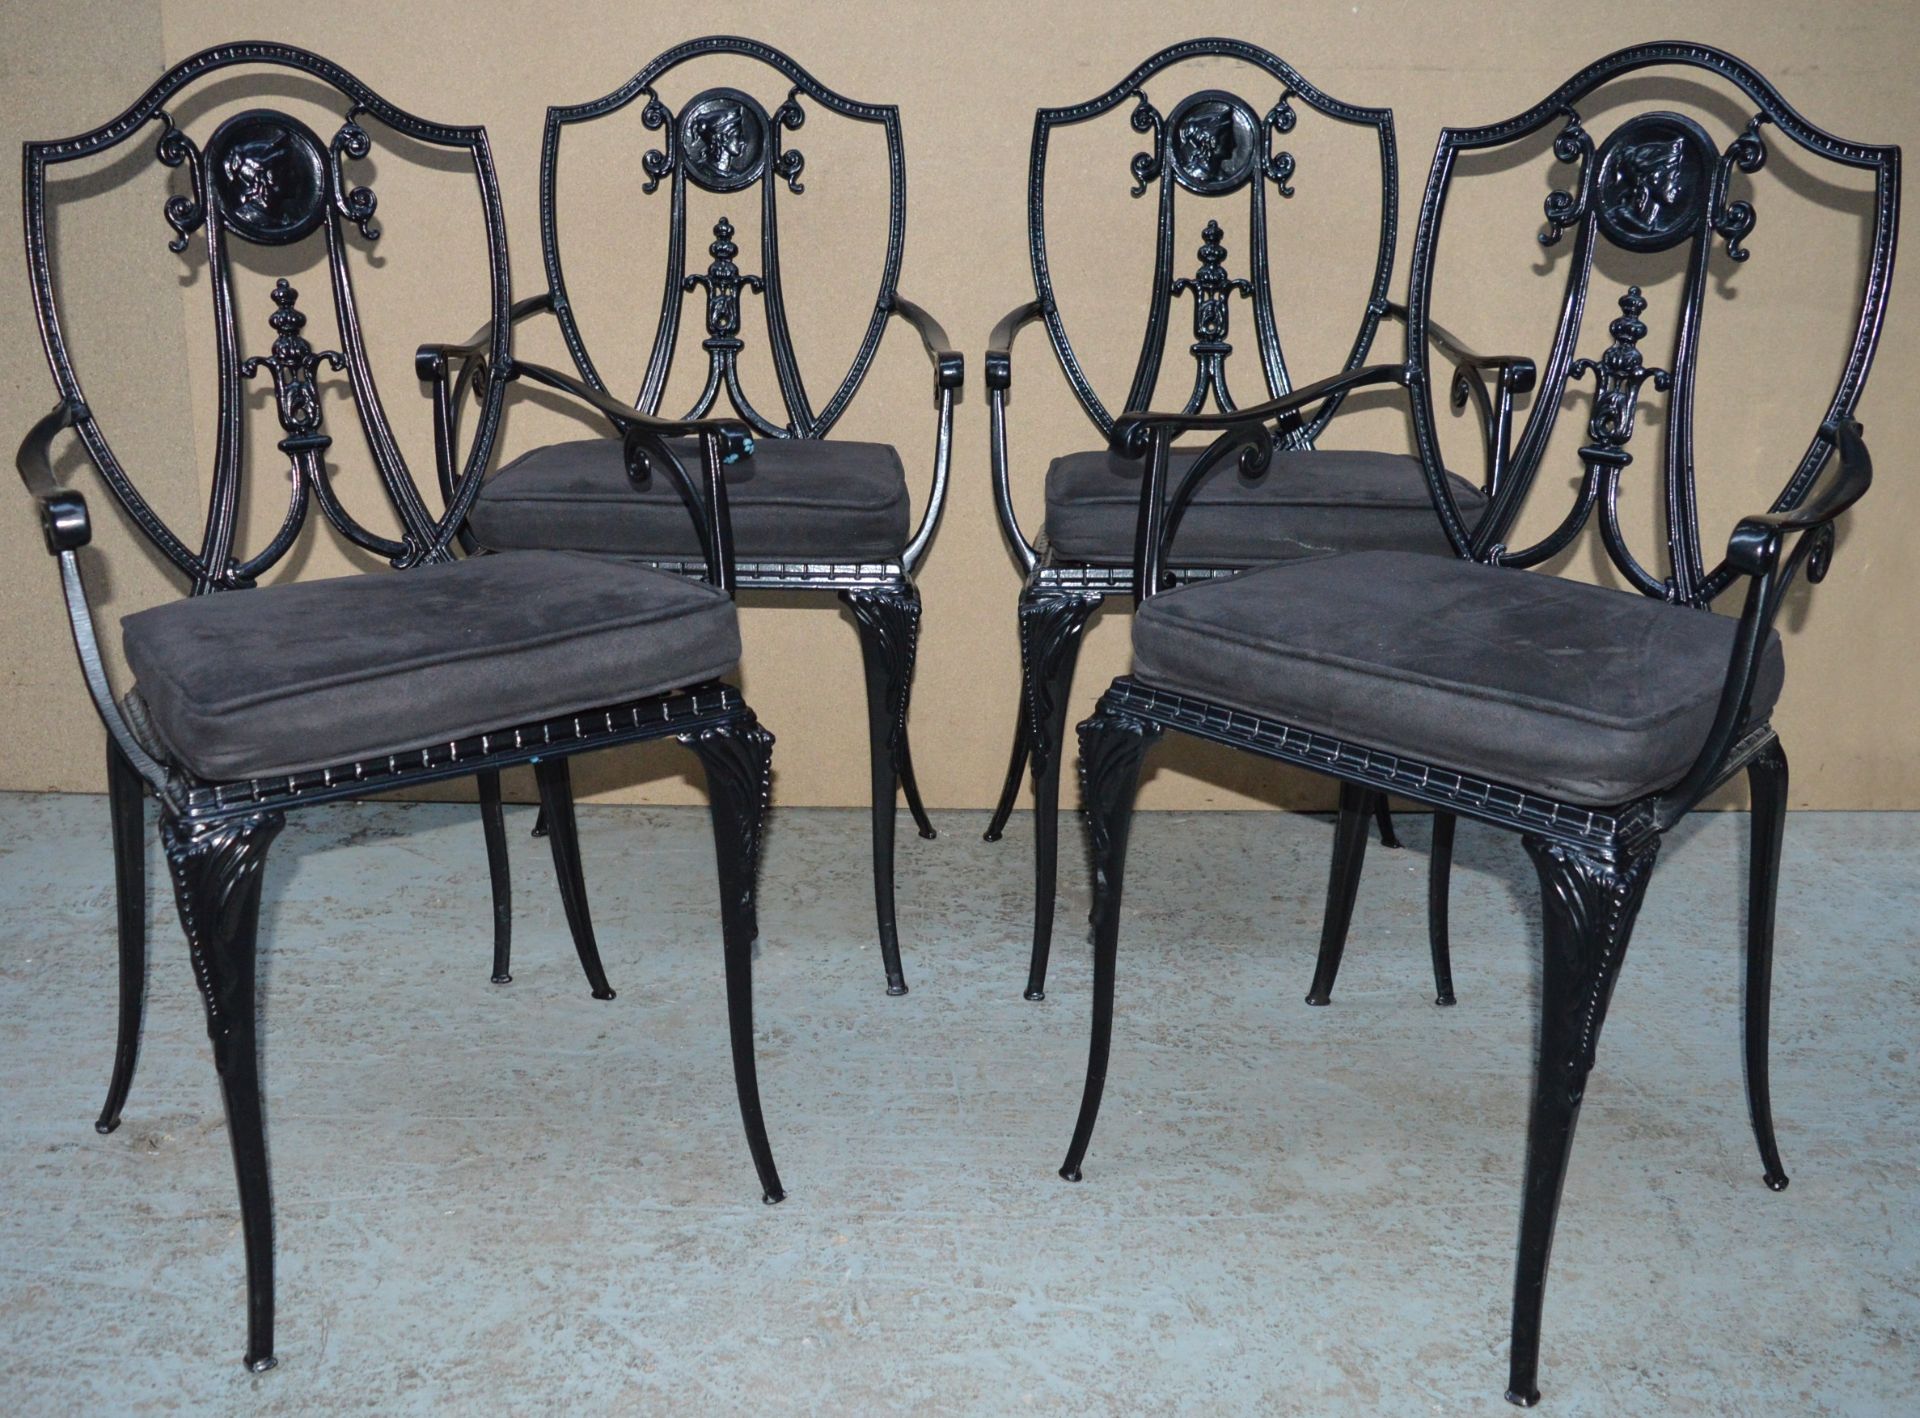 4 x Cast Metal Shield Back Restaurant Chairs - Suitable For Indoor or Outdoor Use - From Famous - Image 3 of 14